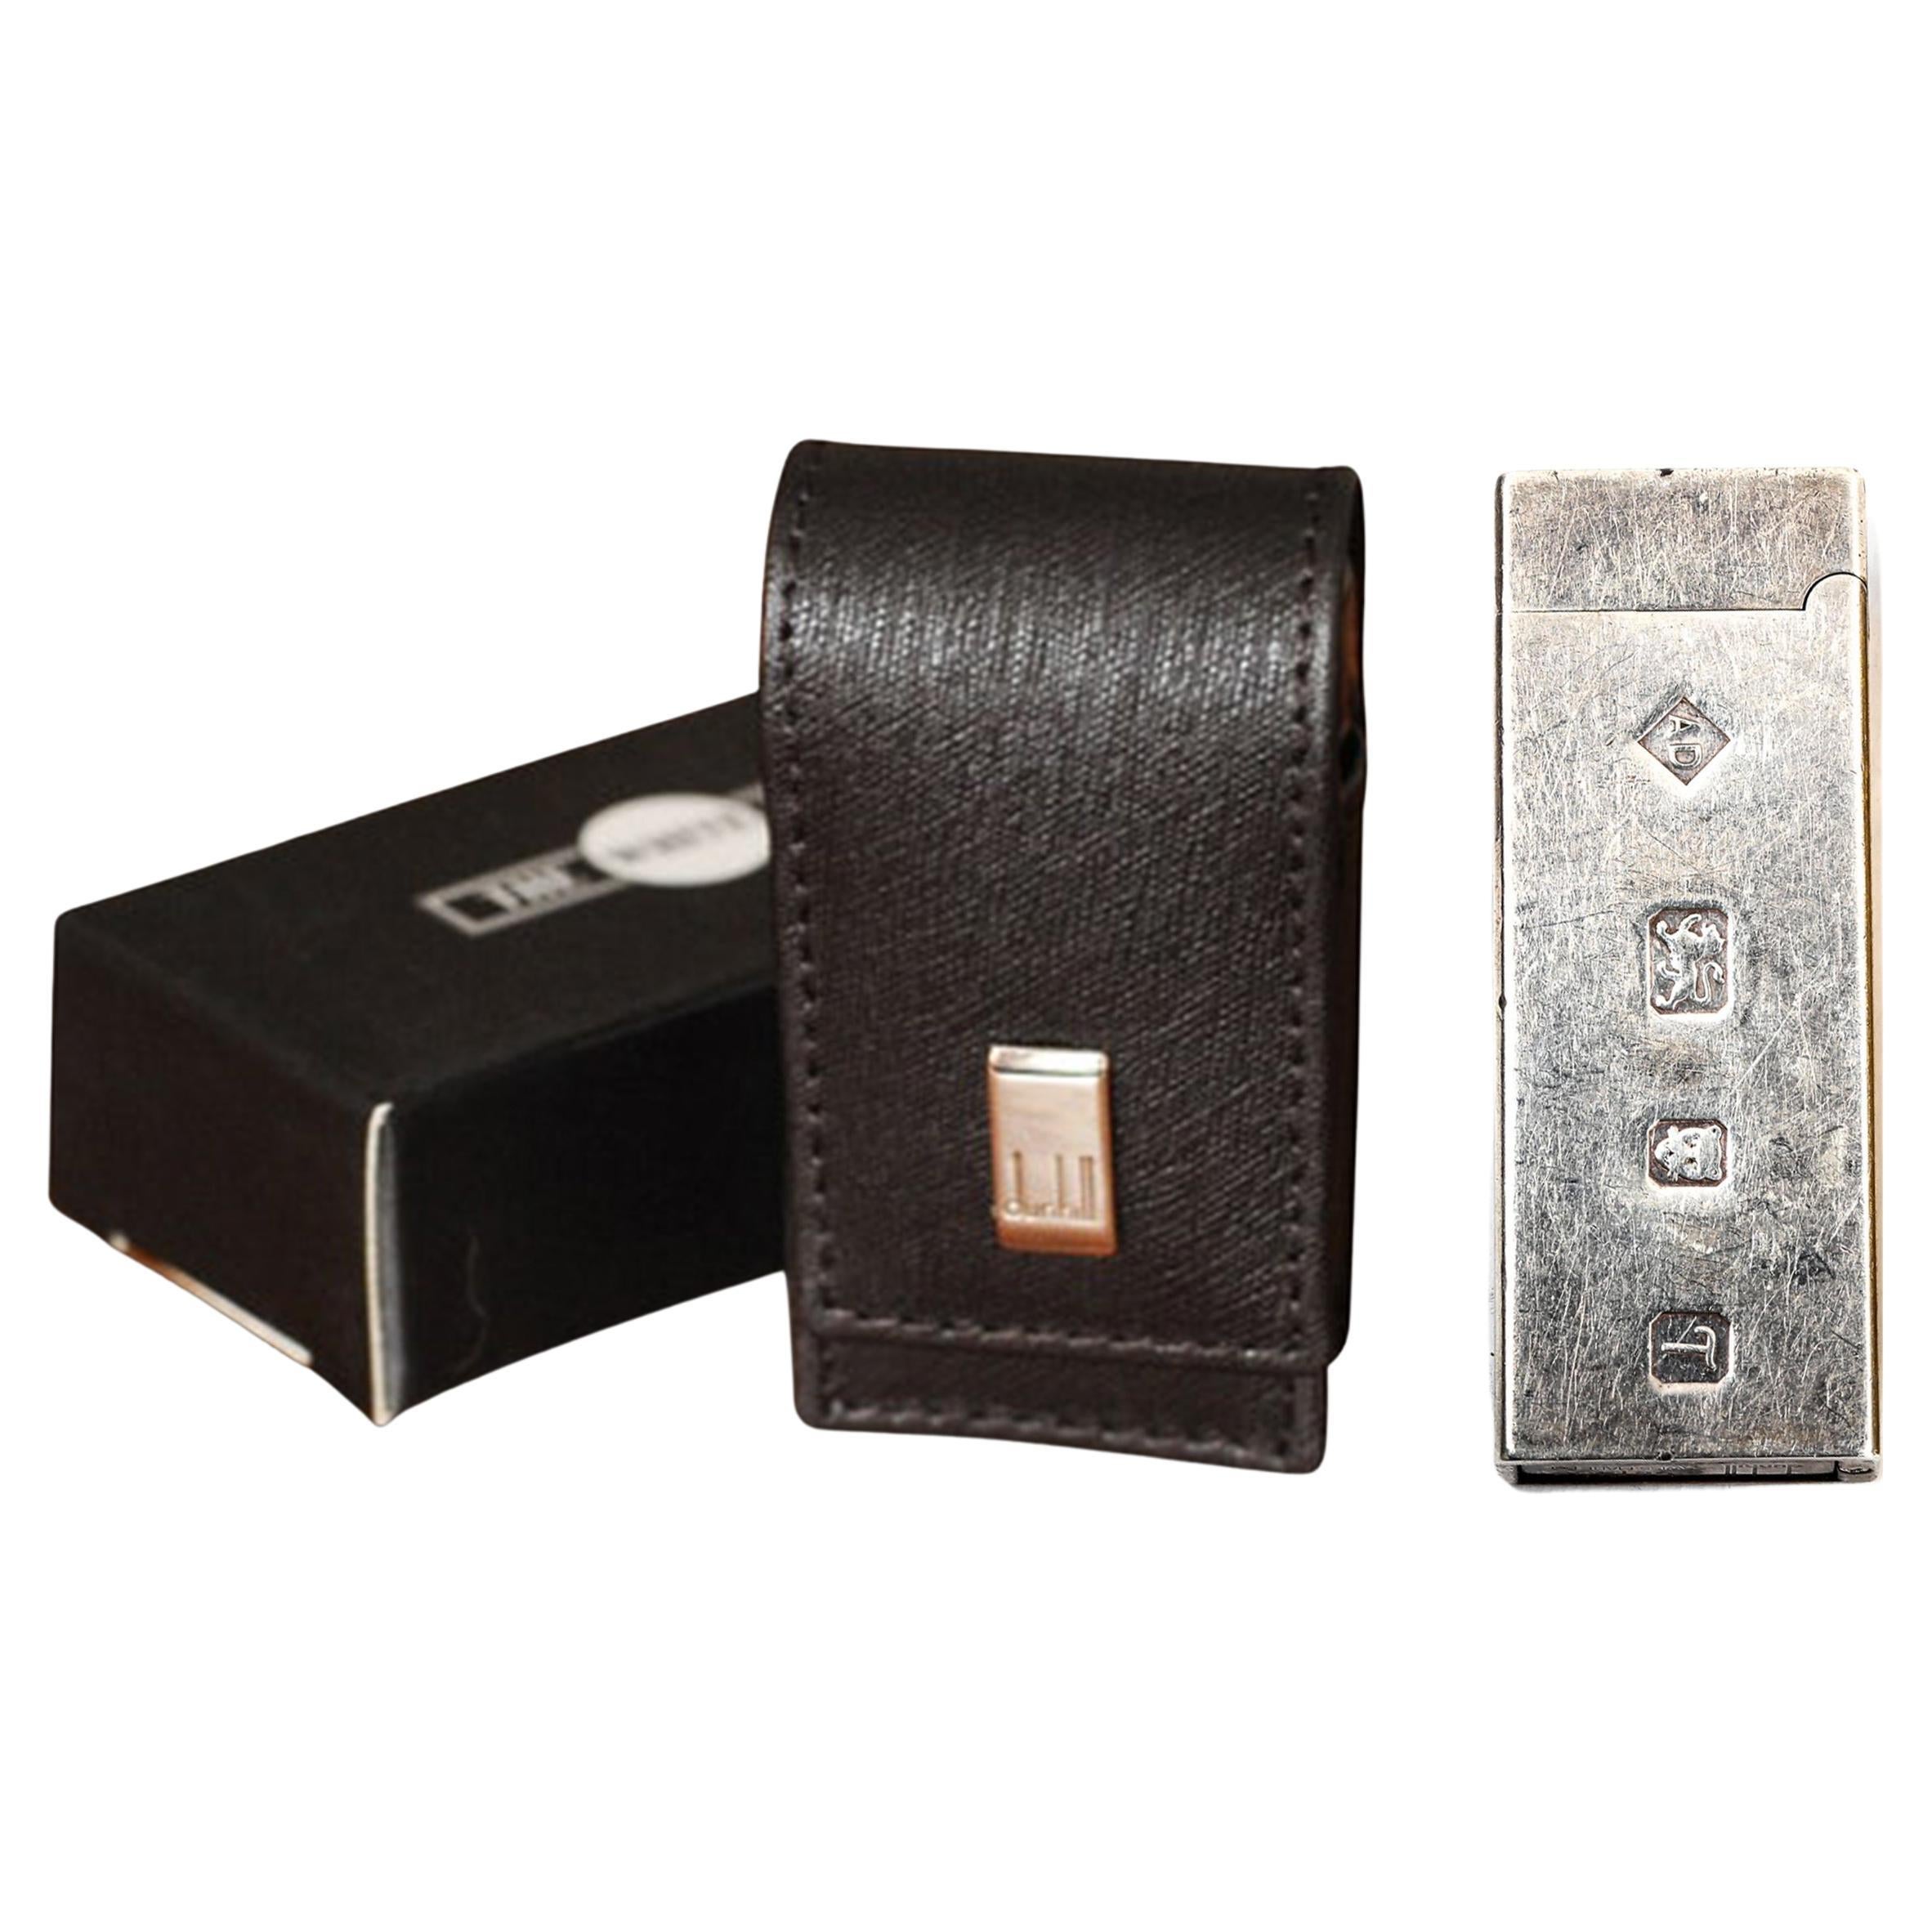 Alfred Dunhill Gemline Model Limited Editioned Solid Silver Hallmarked Lighter